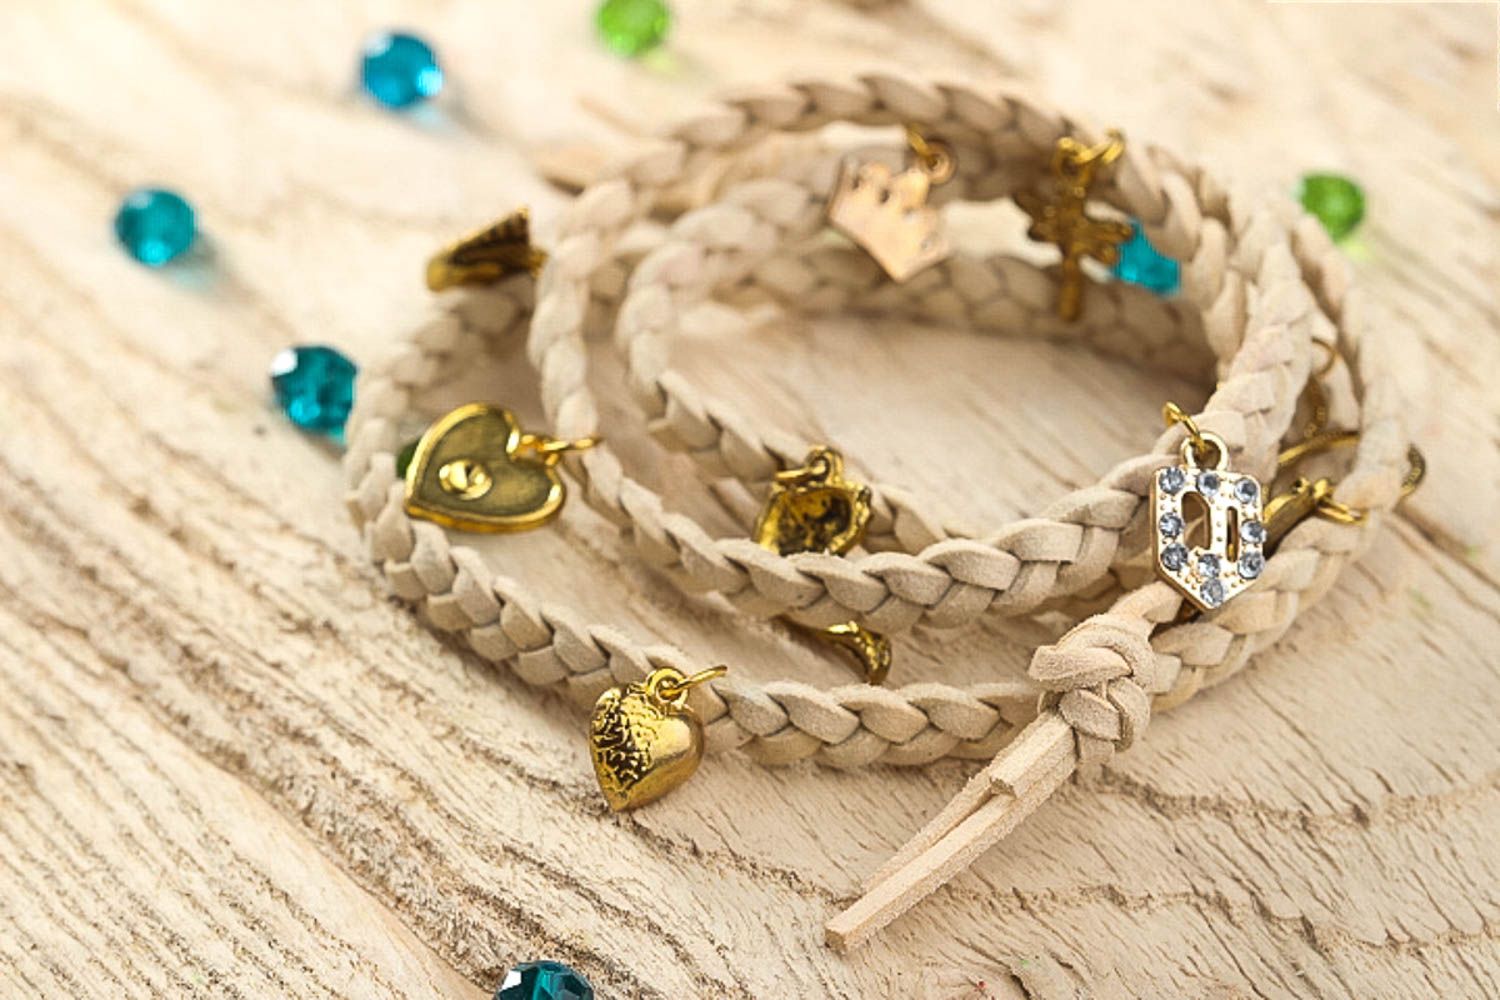 Love For Bracelets At First Sight | by Siddharth Bakshi | Medium